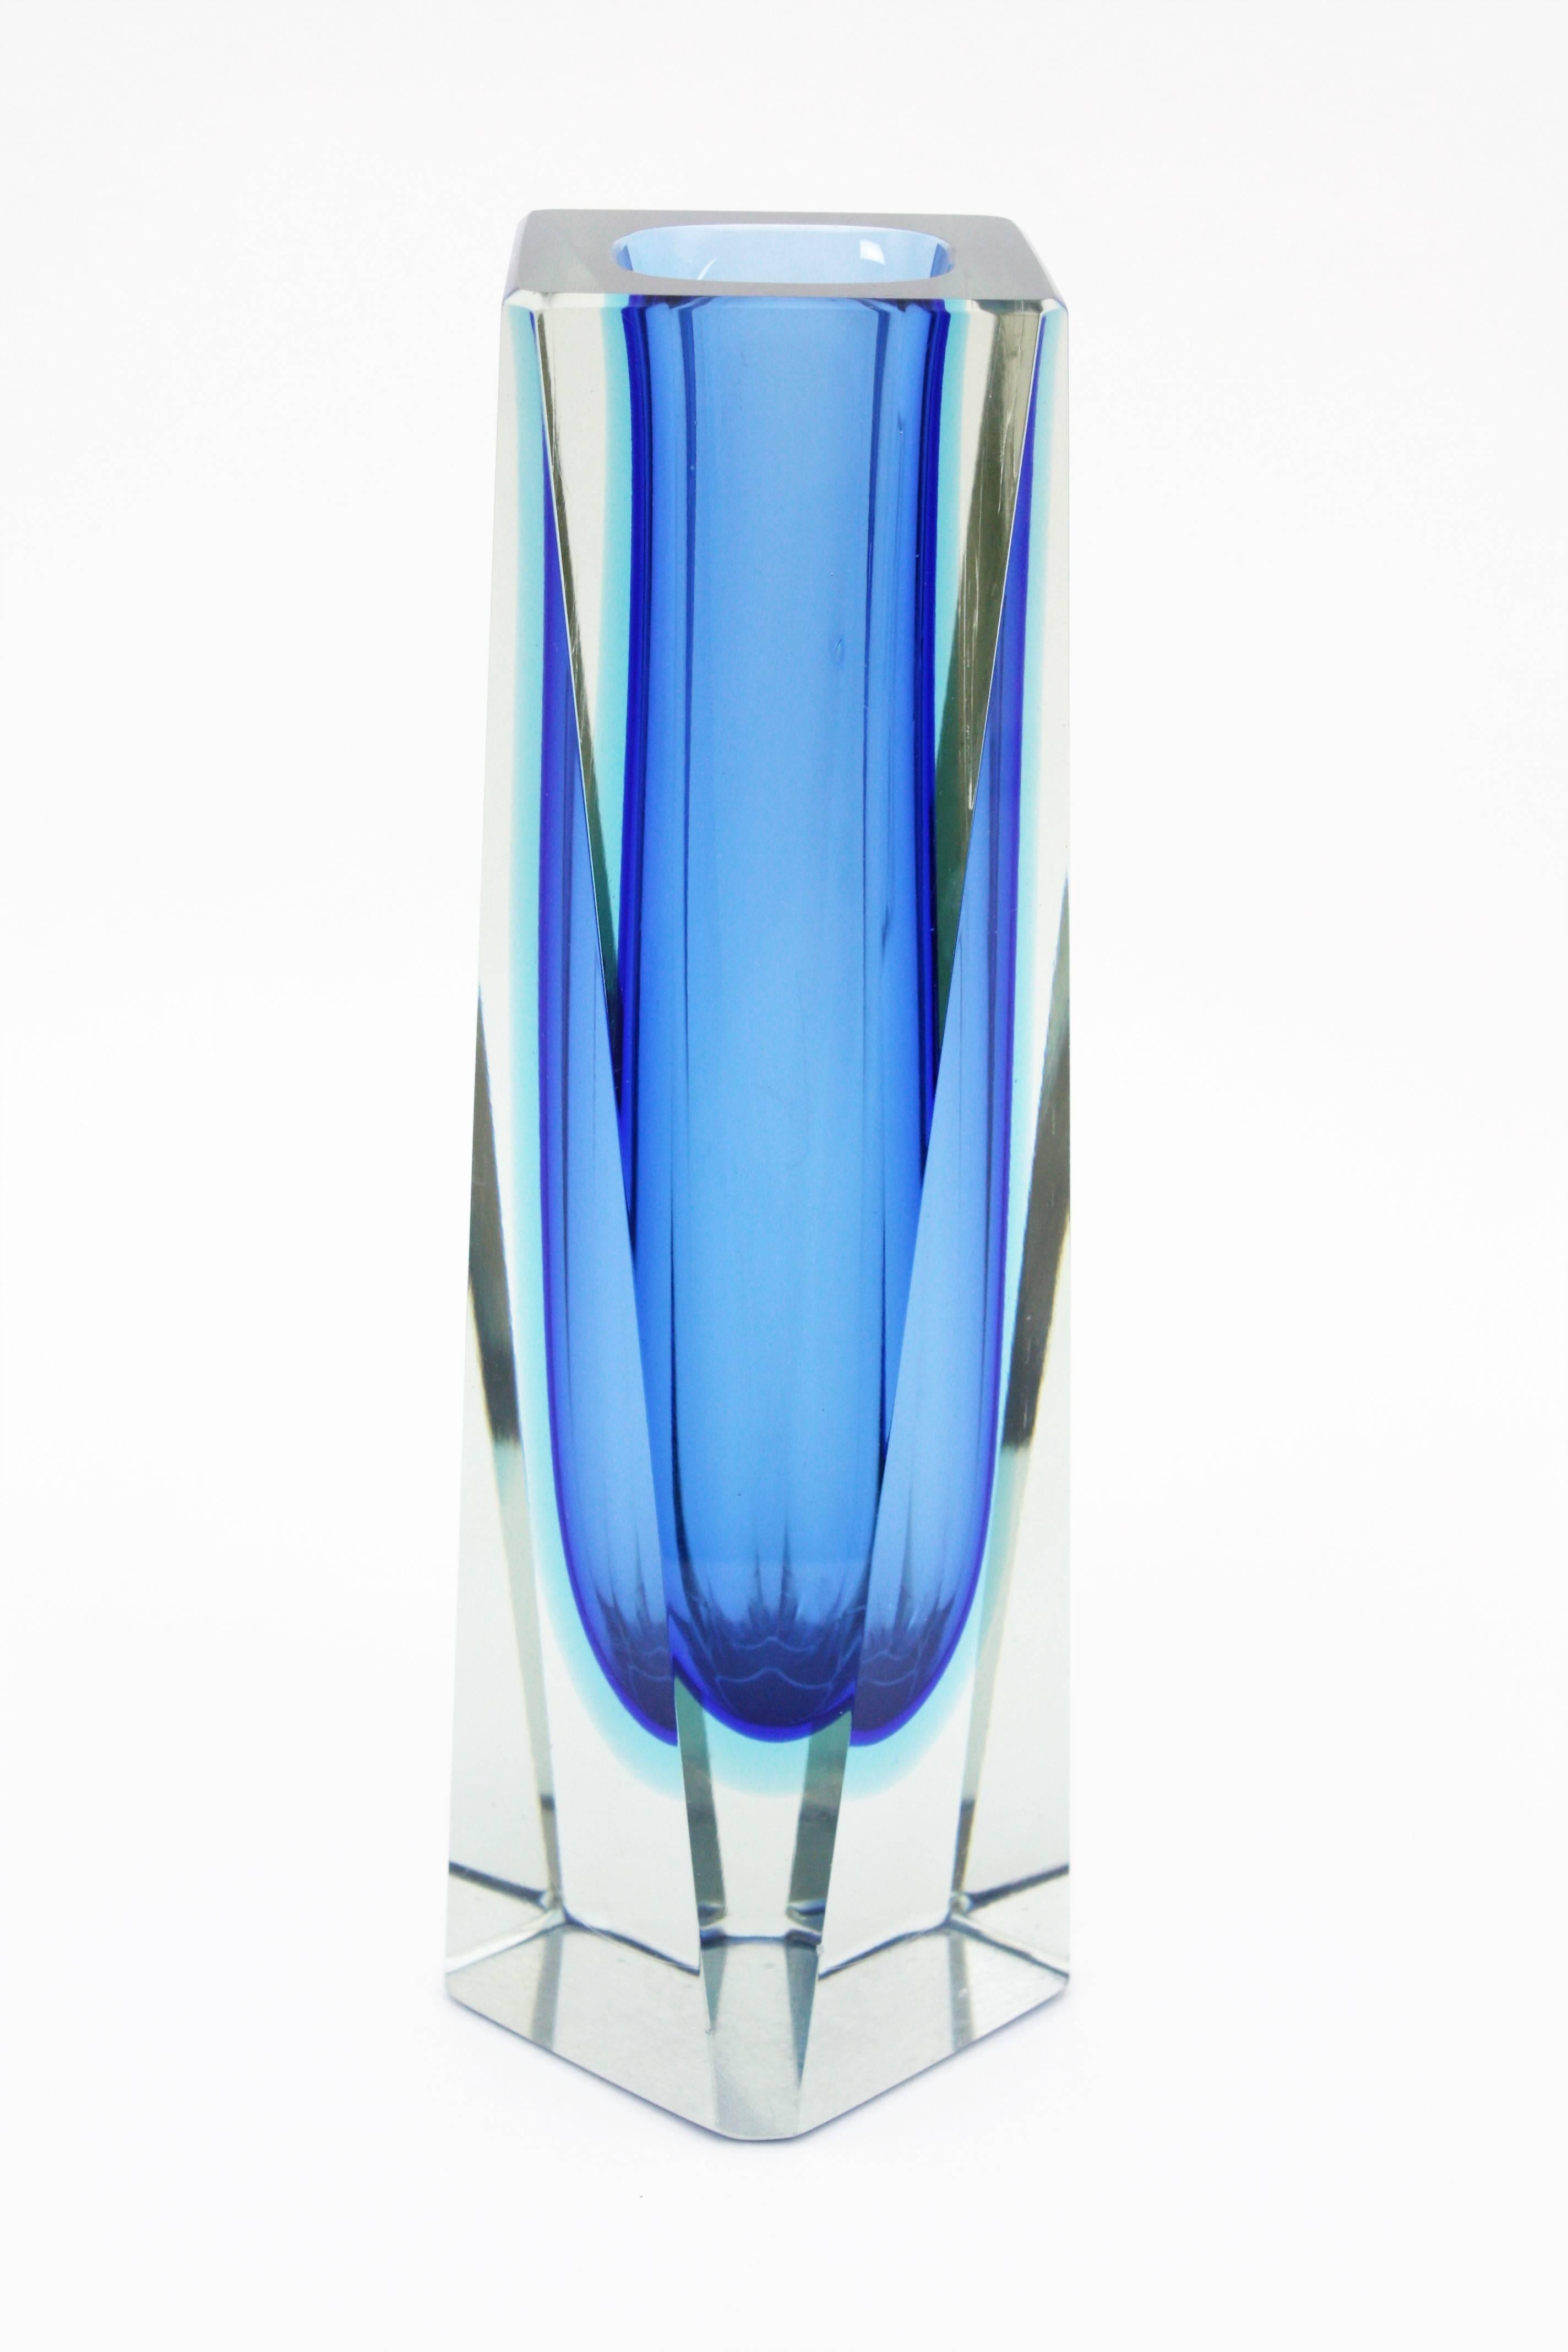 A gorgeous extra large size Sommerso Murano glass vase Sommerso triple cased in blue, Klein blue and sky blue. Unusual squared shape with faceted isosceles triangular faces. Spectacular placed with other Murano glass pieces as shown. Manufactured by